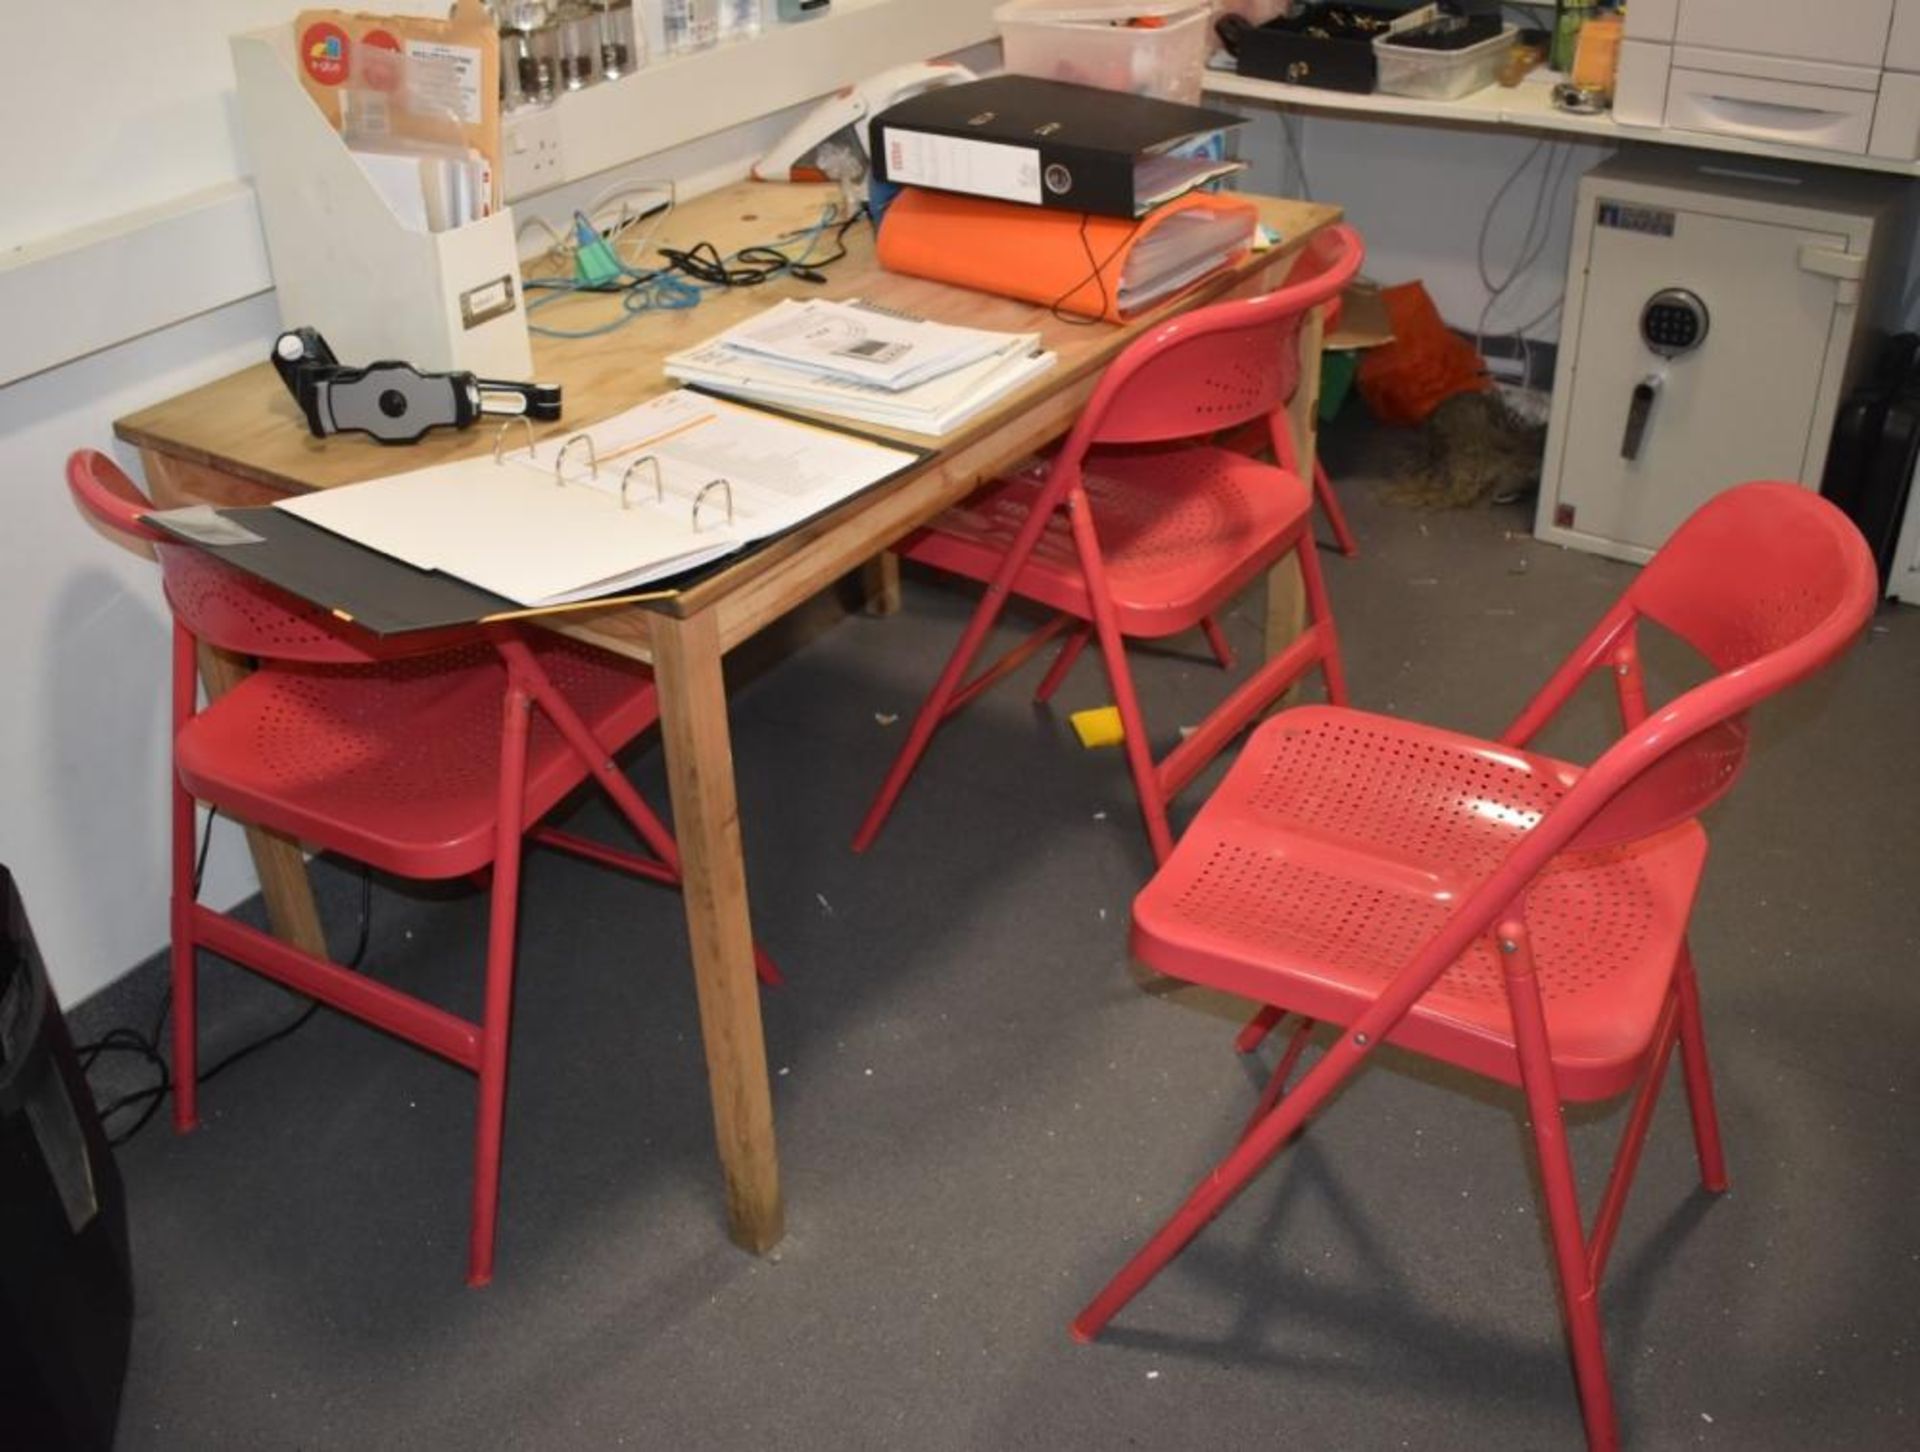 1 x Rectangular Wooden Table With Four Red Folding Chairs - CL489 - Location: Putney, London, SW15